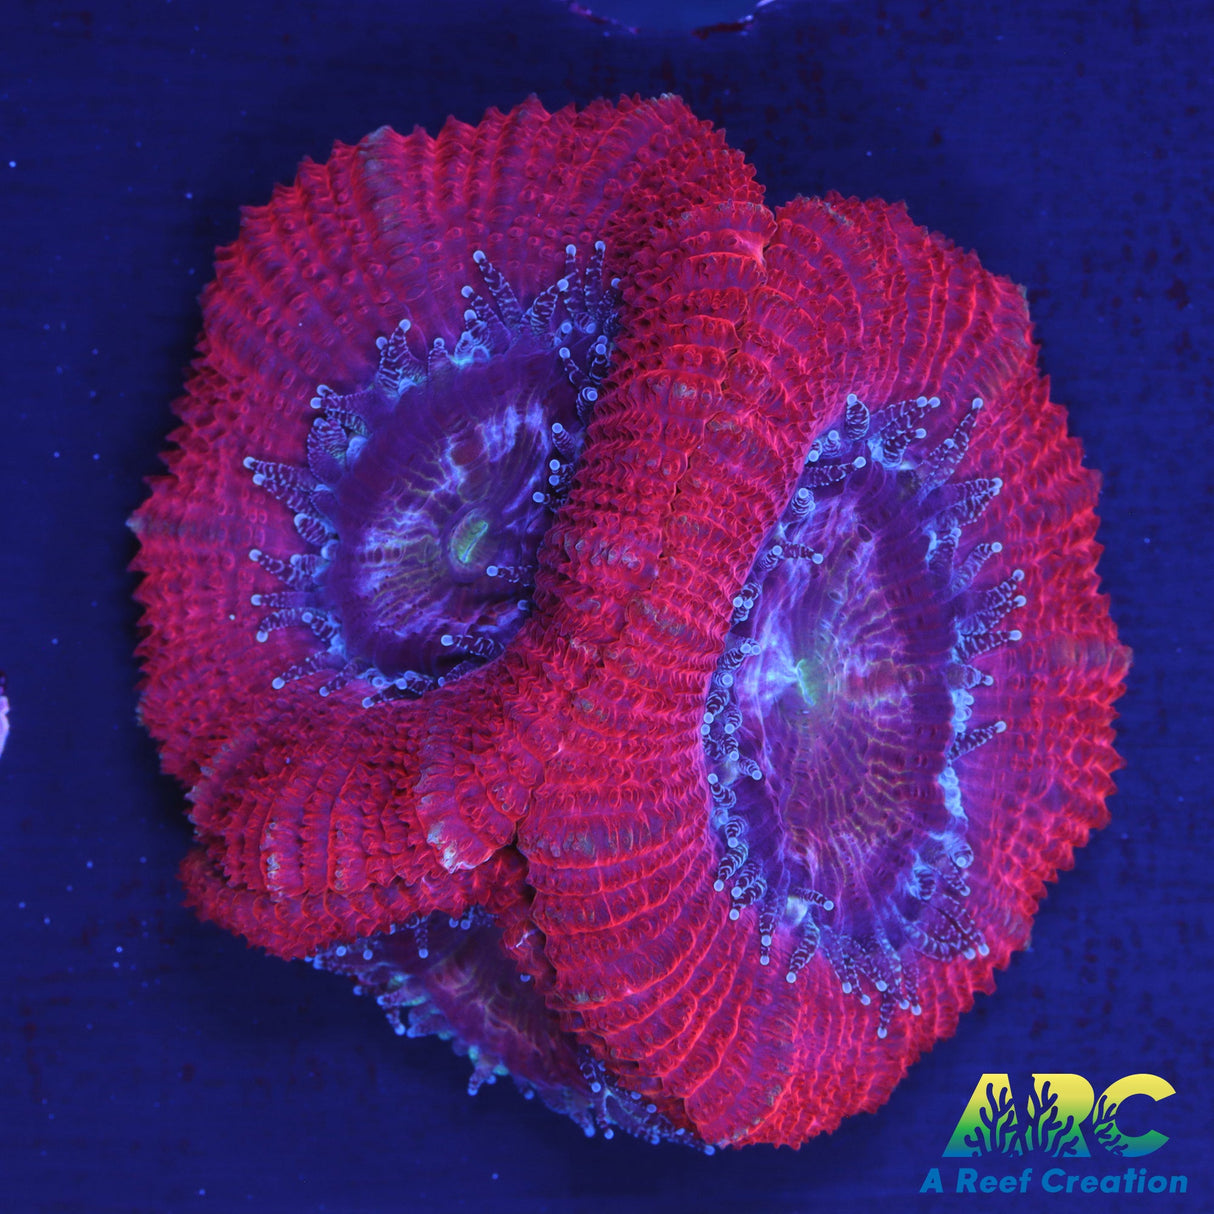 Red Large Polyp Acan